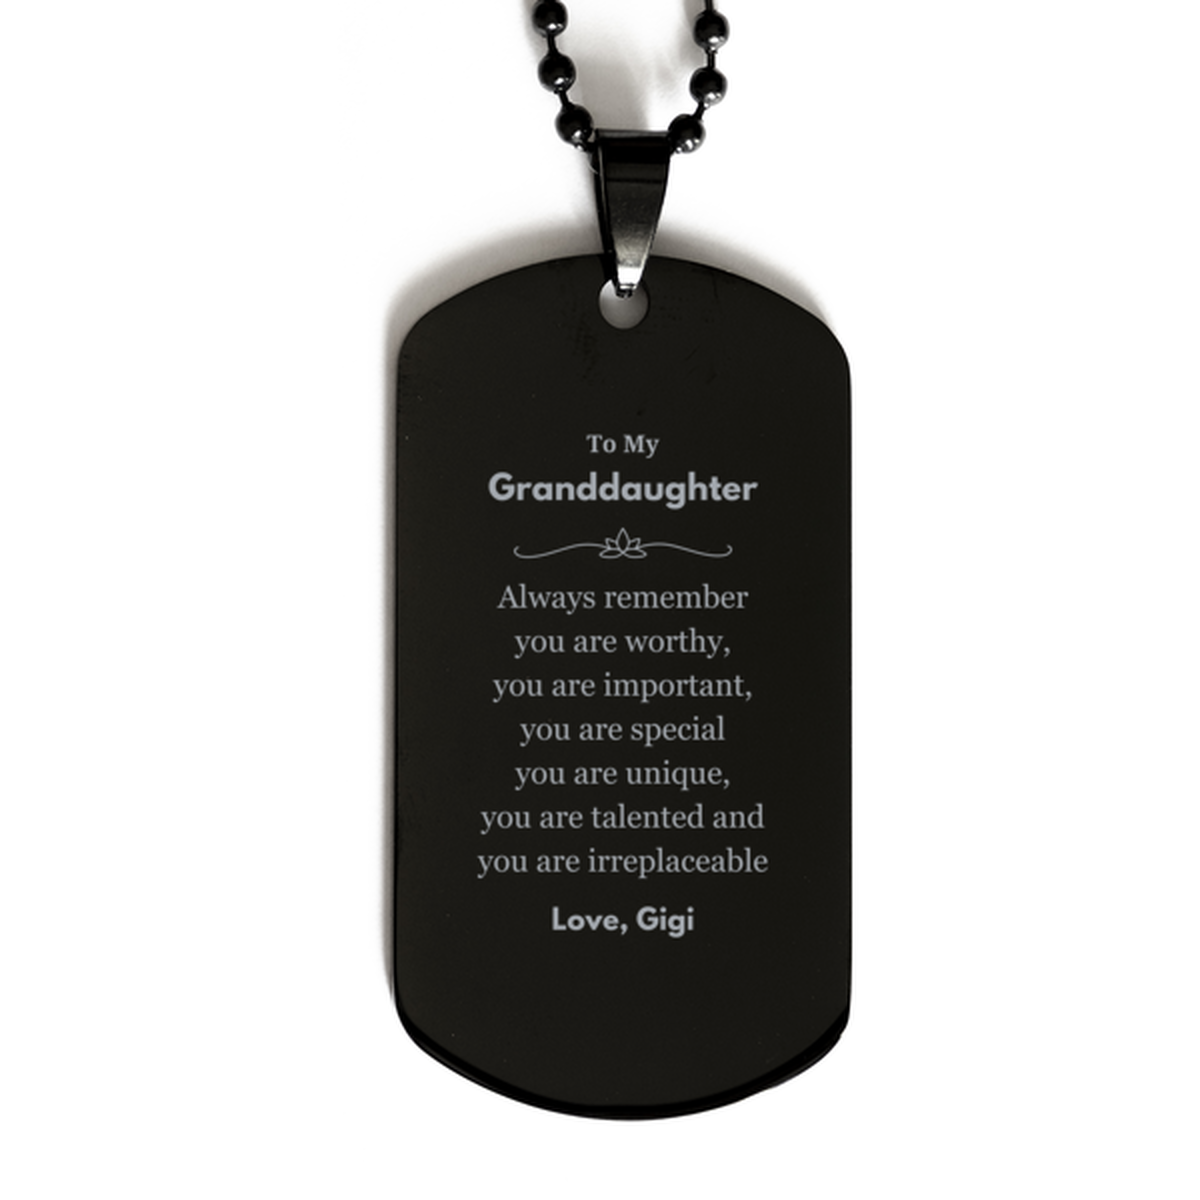 Granddaughter Birthday Gifts from Gigi, Inspirational Black Dog Tag for Granddaughter Christmas Graduation Gifts for Granddaughter Always remember you are worthy, you are important. Love, Gigi